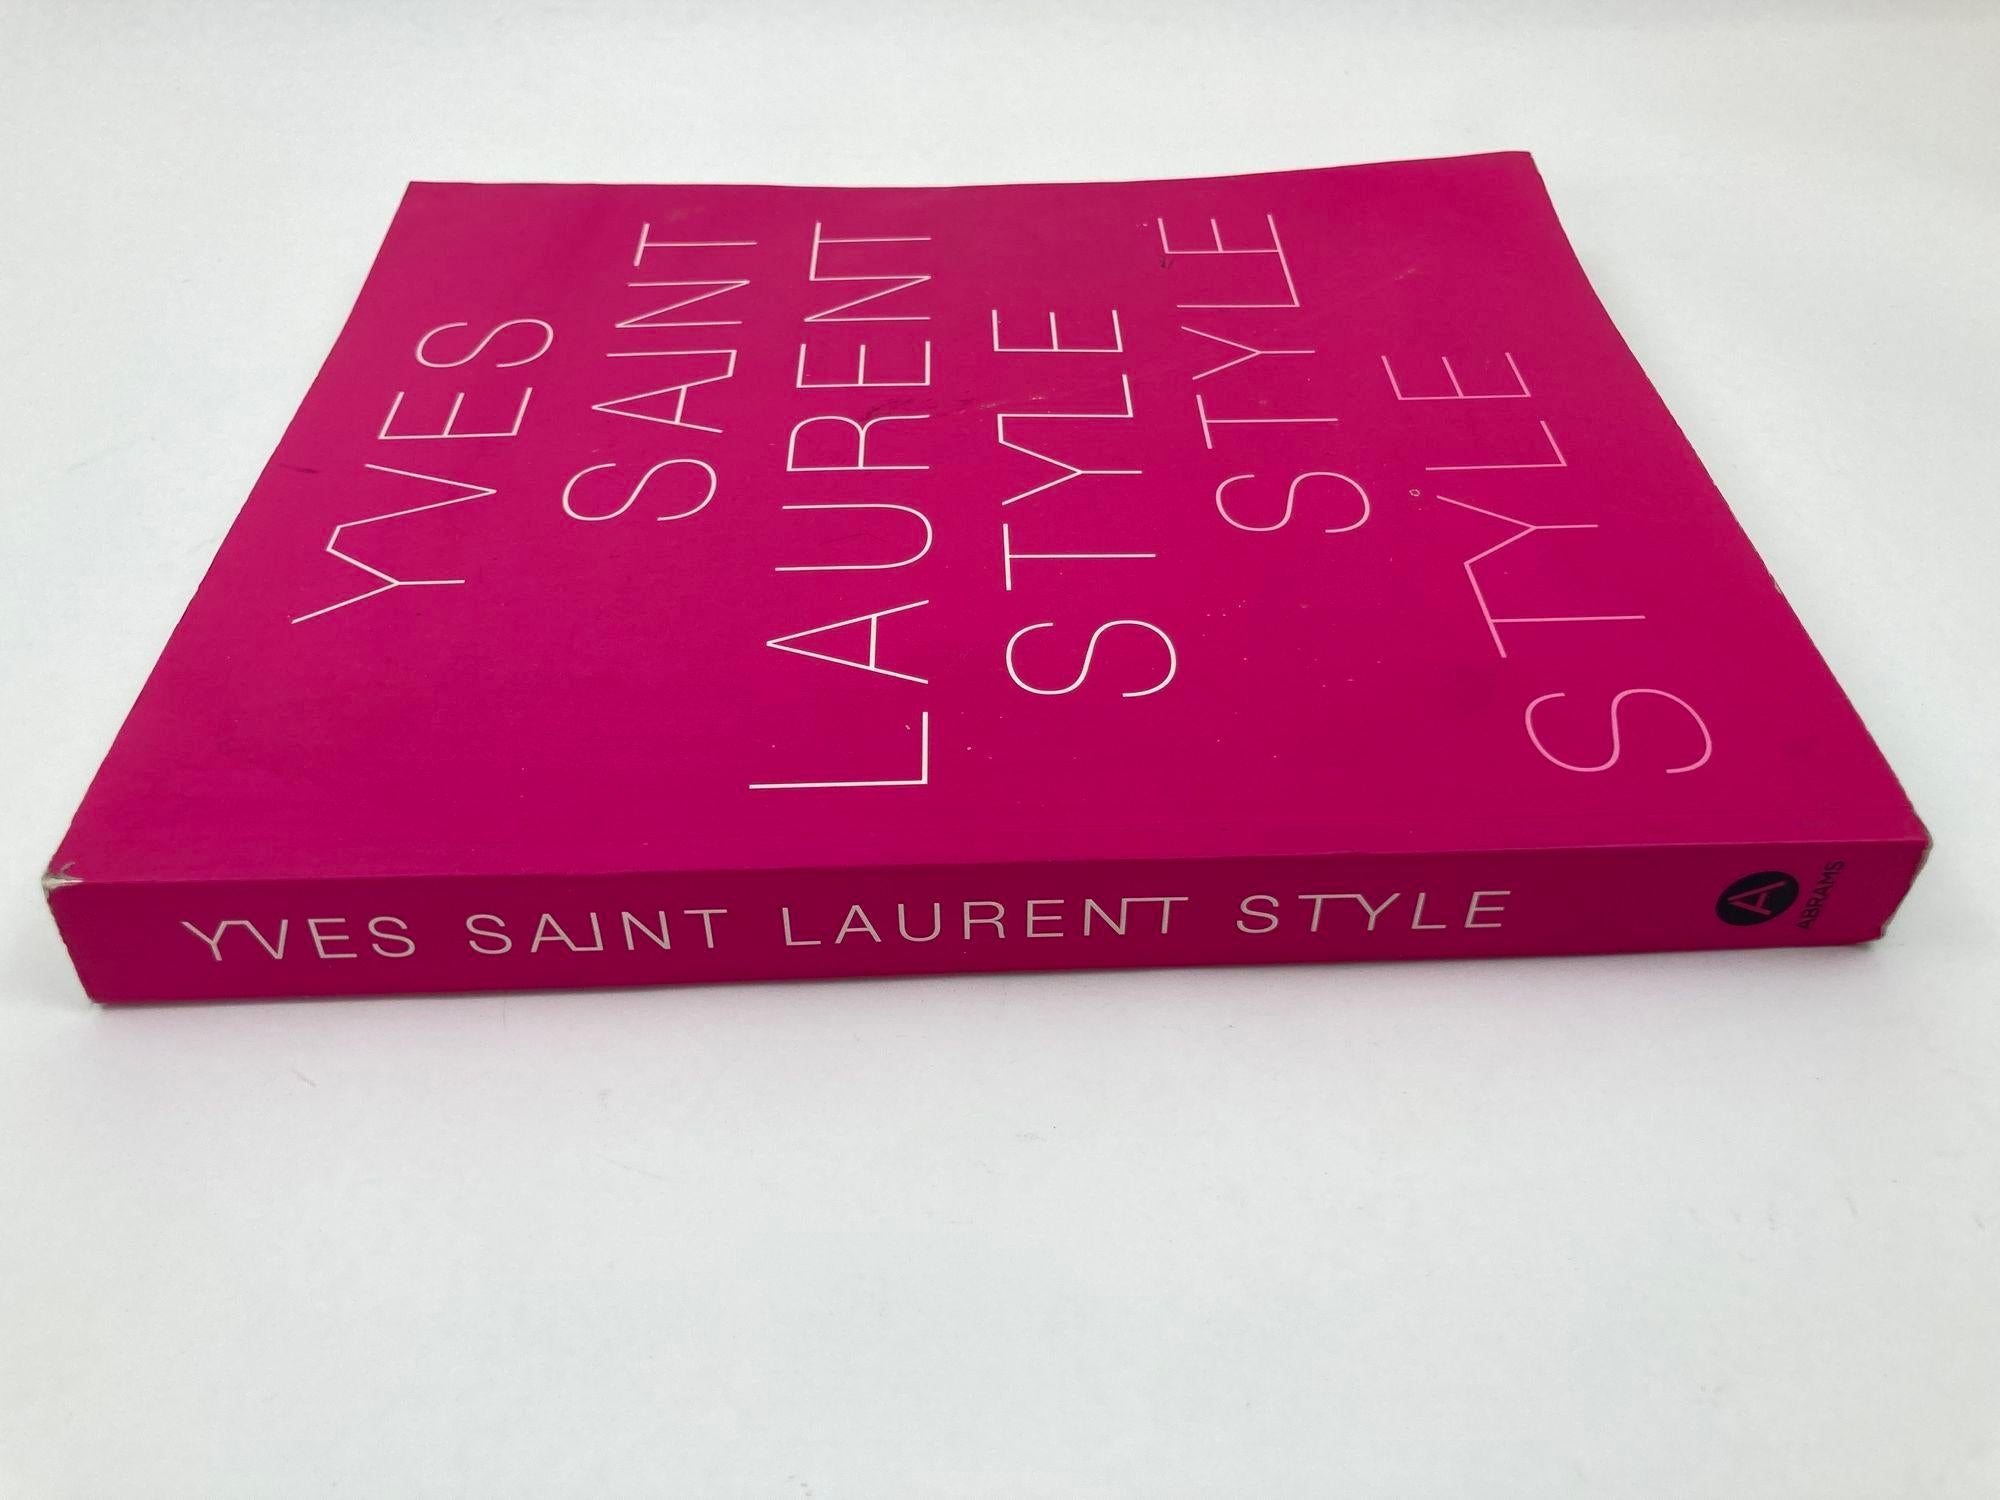 Modern Yves Saint Laurent Style Paperback 2008 Pink book by Foundation Pierre Berge For Sale